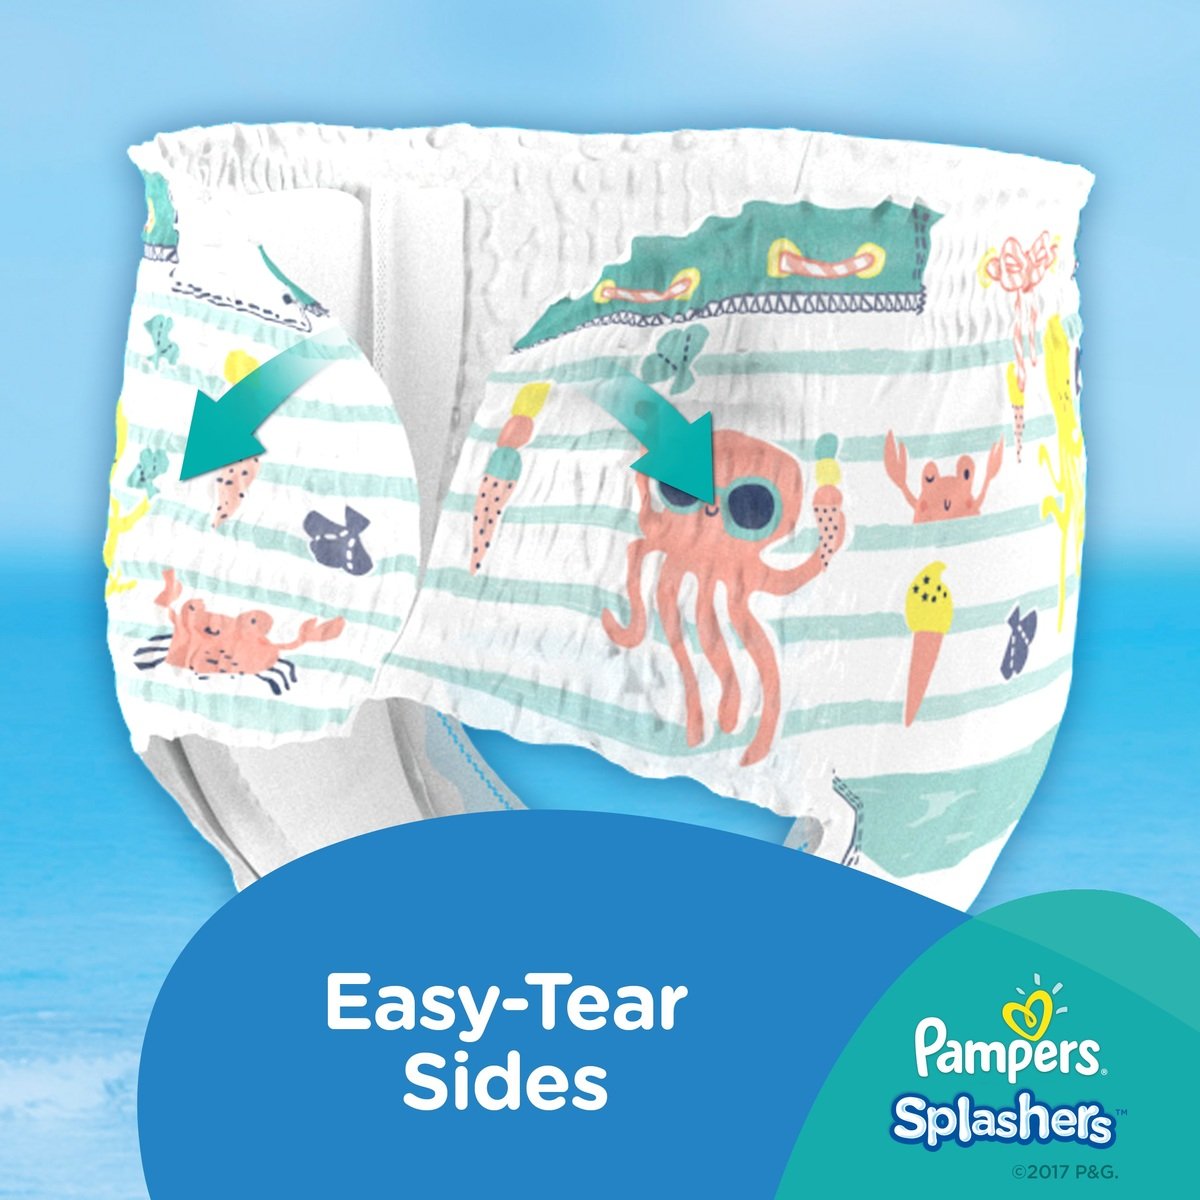 Pampers Splashers Swimming Pants, Size 4-5, 9-15 kg, 11 Count